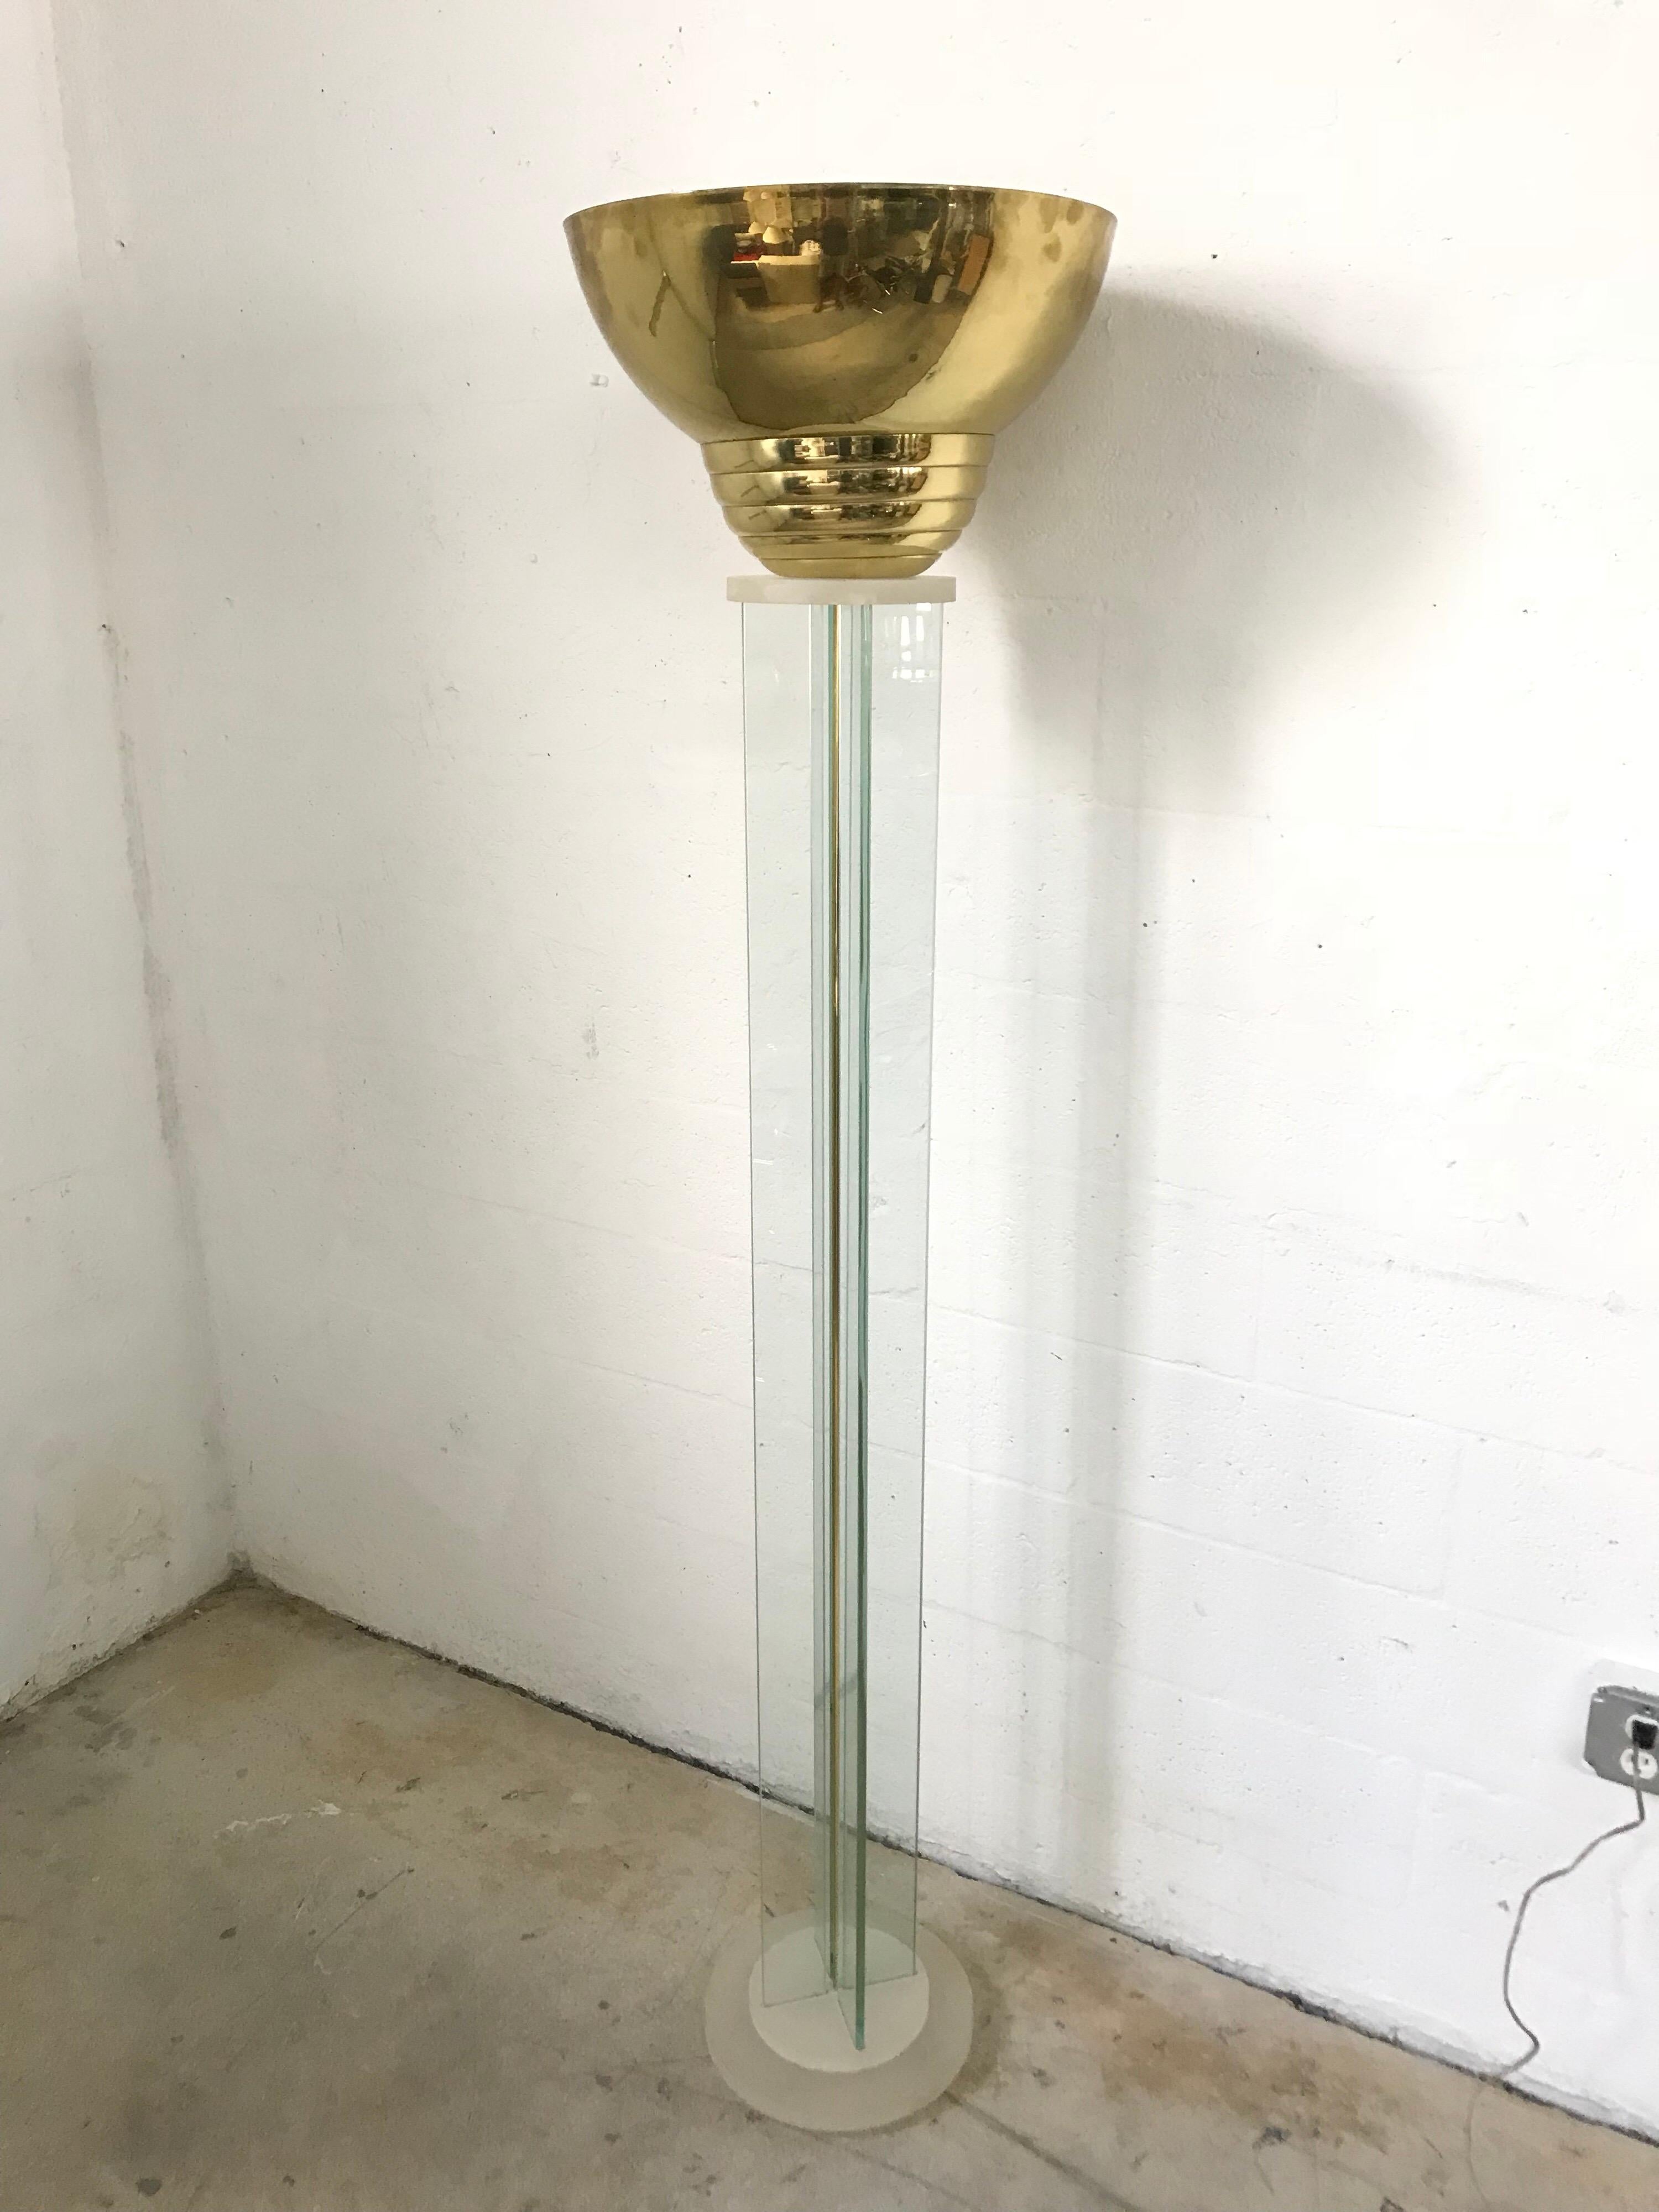 Lucite, glass and brass floor lamp designed by Steve Chase.